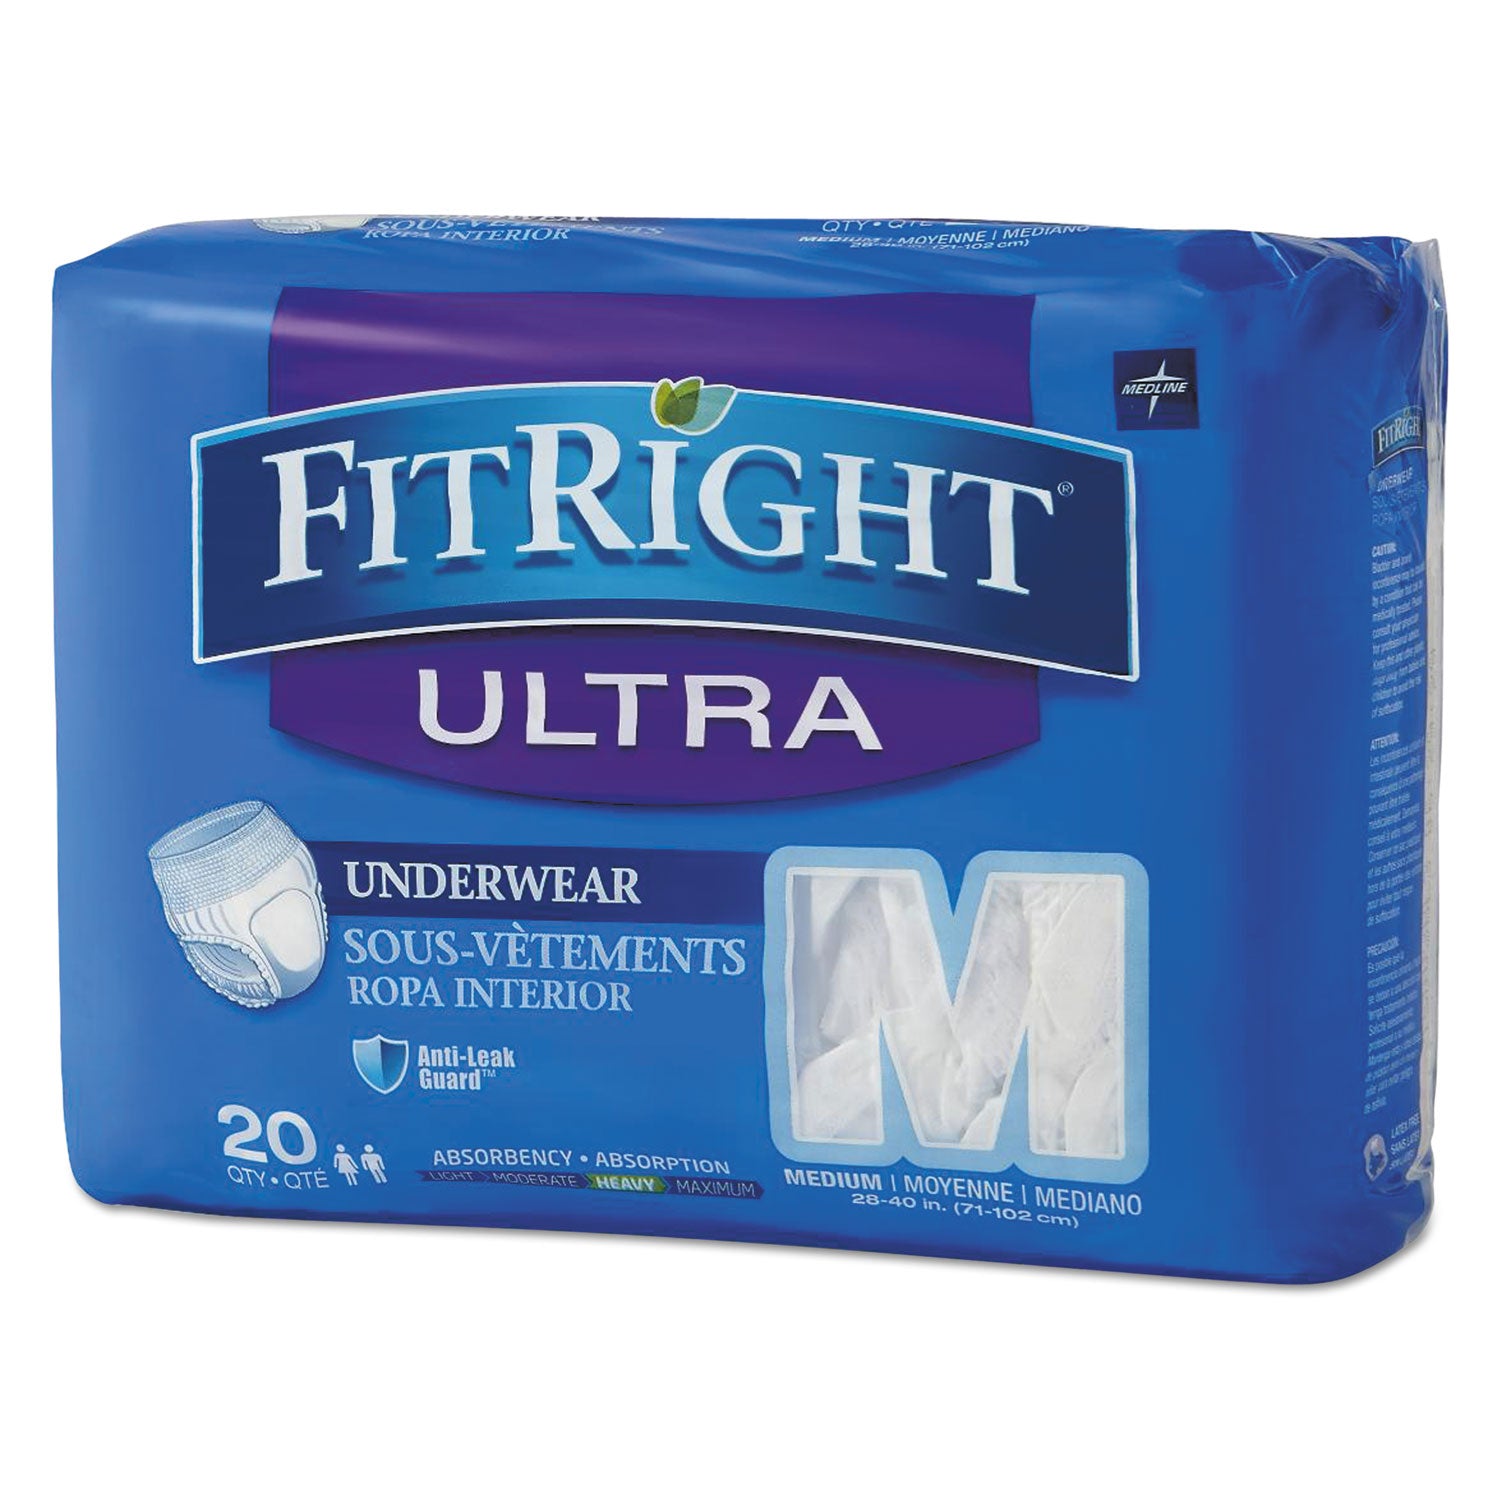 fitright-ultra-protective-underwear-medium-28-to-40-waist-20-pack-4-pack-carton_miifit23005act - 1